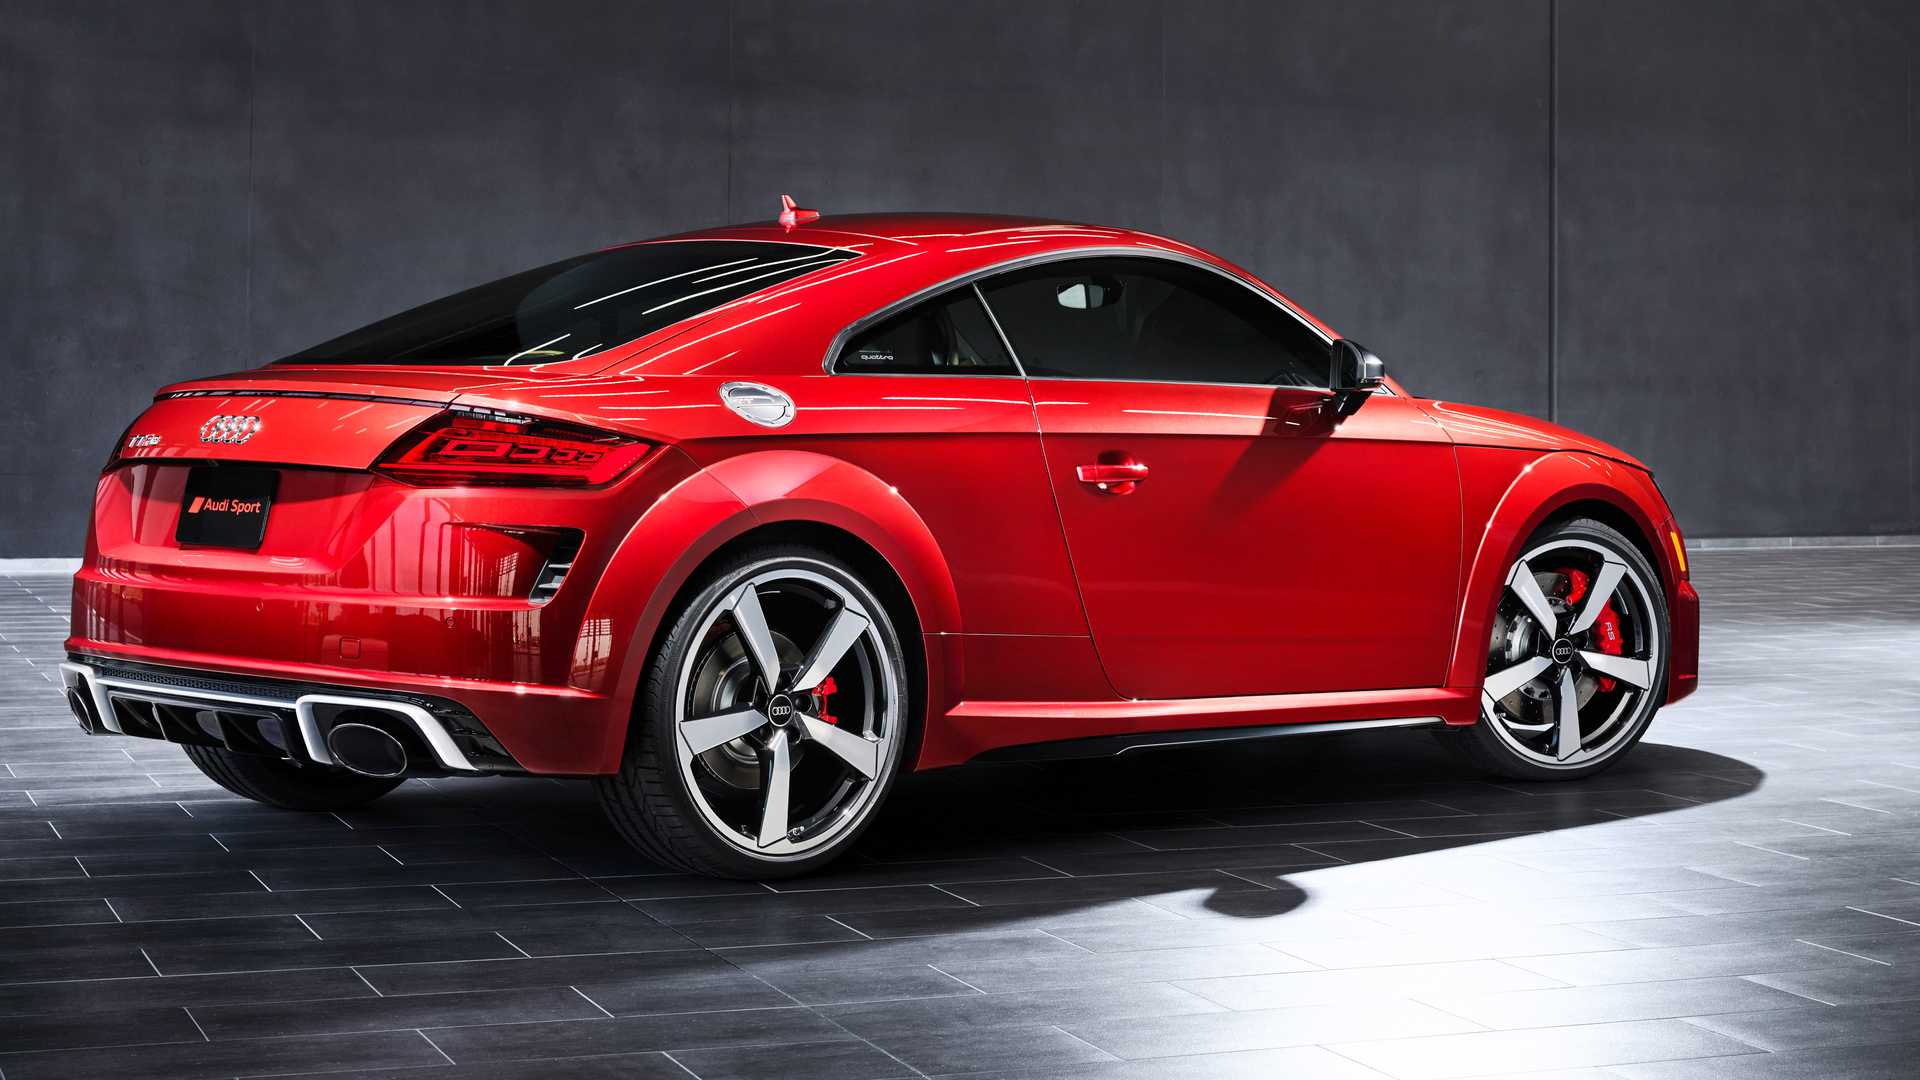 Limitededition special model marks anniversary the new Audi TT RS 40  years of quattro  Audi MediaCenter